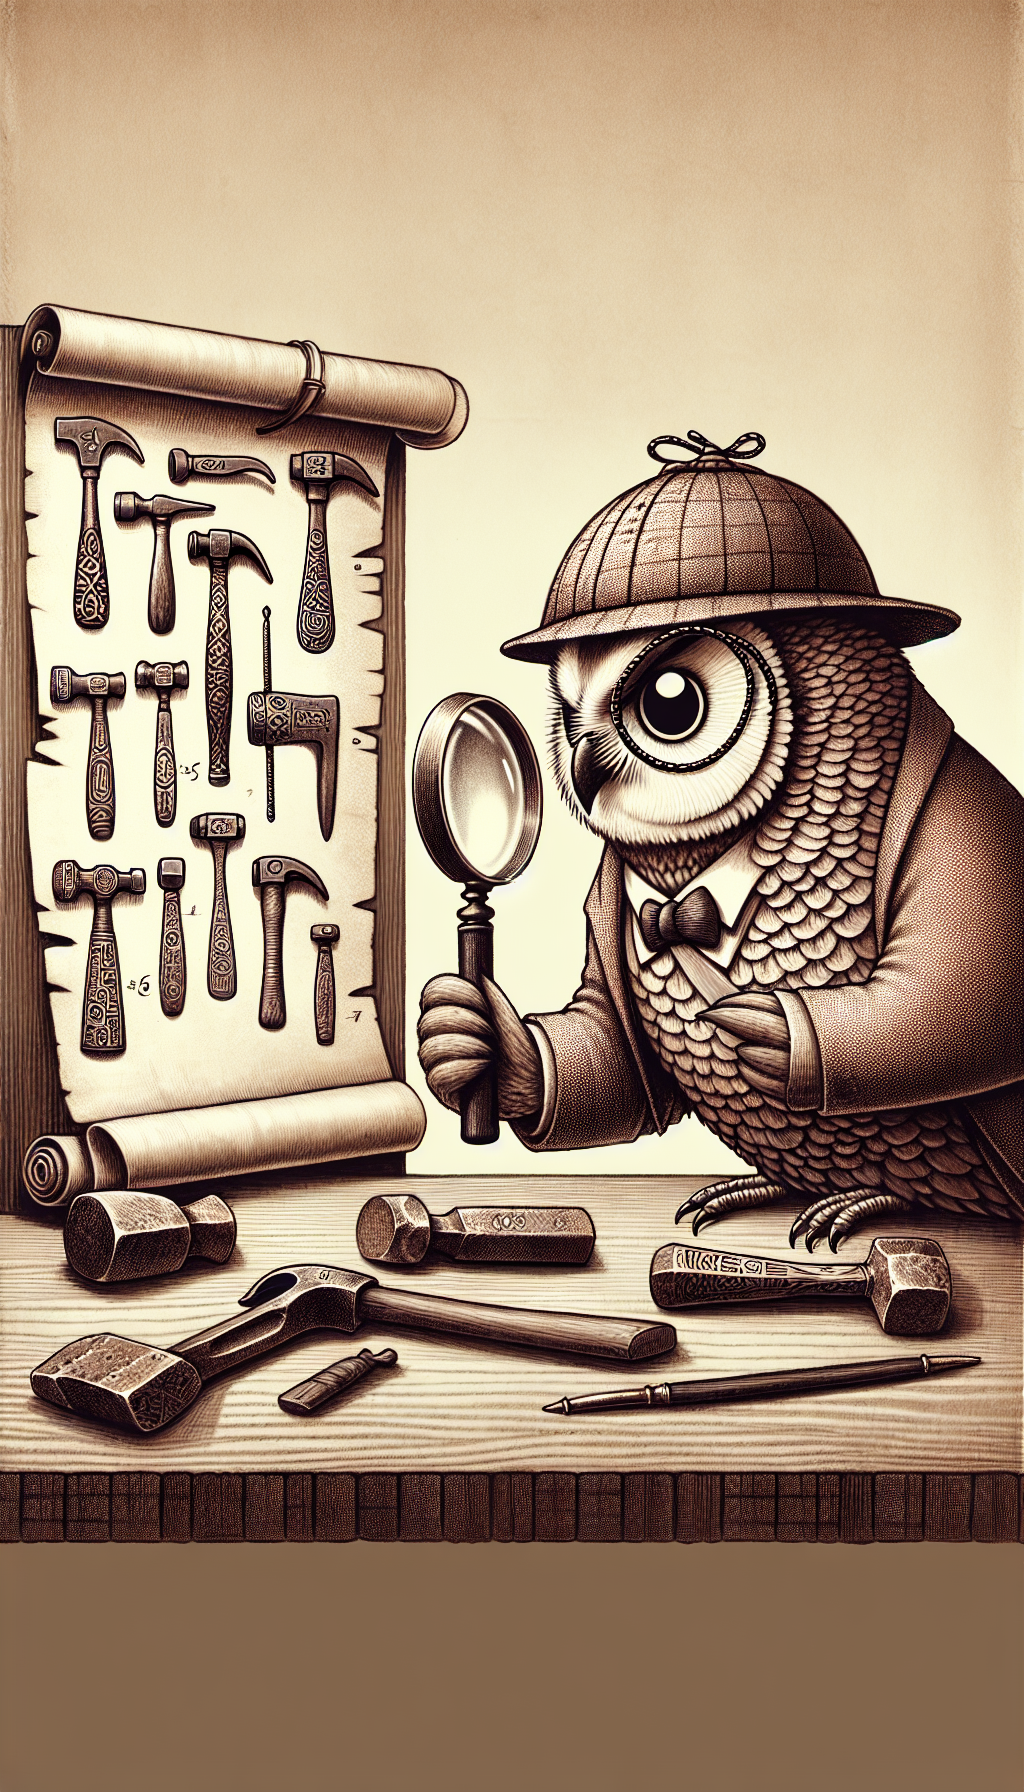 A whimsical, sepia-toned illustration depicts an owl wearing a detective's monocle and tweed cap, perched on an ancient scroll unrolling across a wooden workbench scattered with diverse vintage hammers, each labeled with dates and intricate patterns, resembling hieroglyphs. The owl, poised with a magnifying glass, inspects a particularly ornate hammer, symbolizing the scholarly pursuit of antique hammer identification.